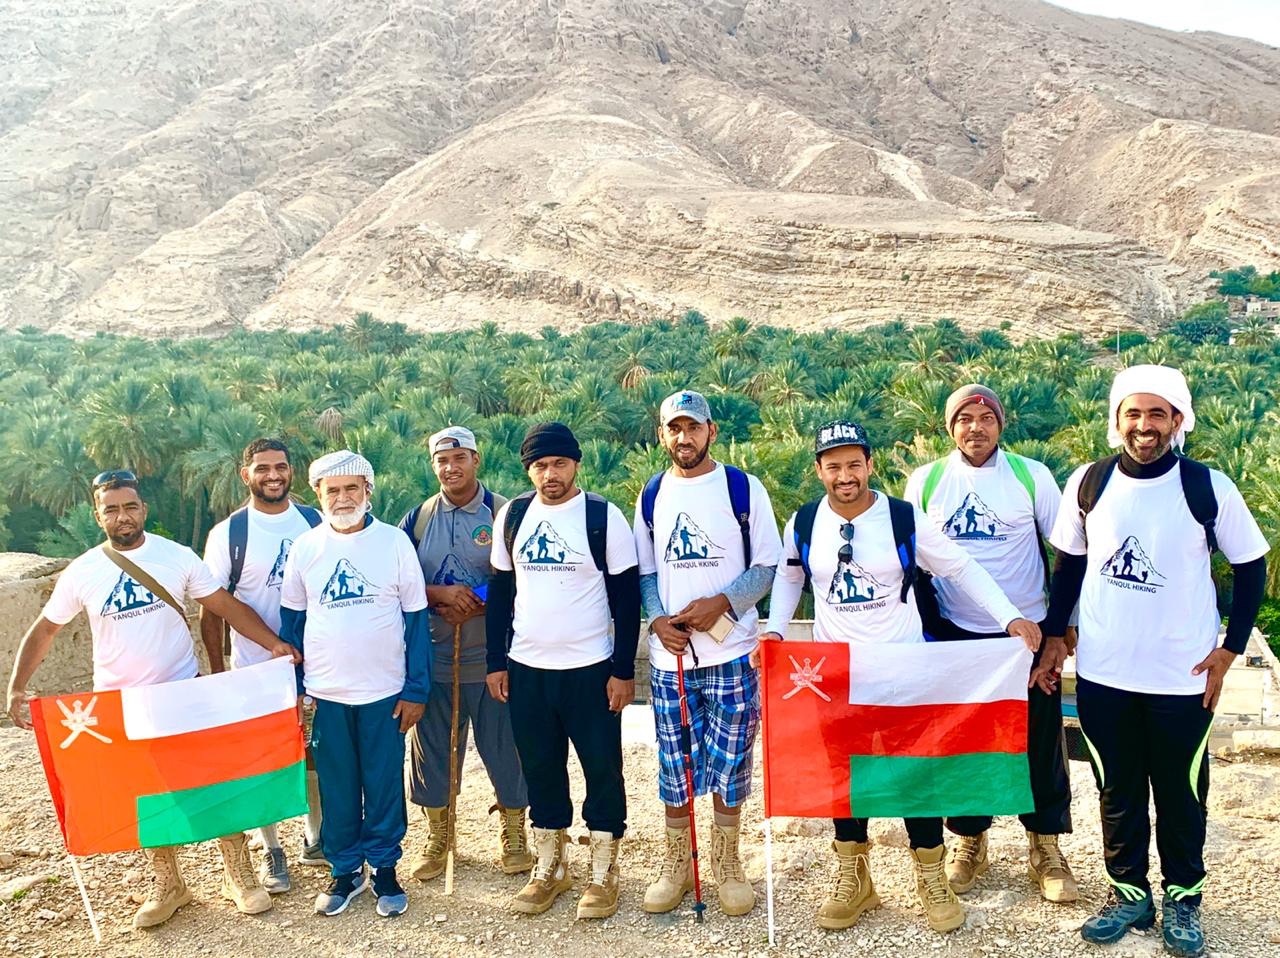 Meet this 70-year-old Omani who walked 52km on foot